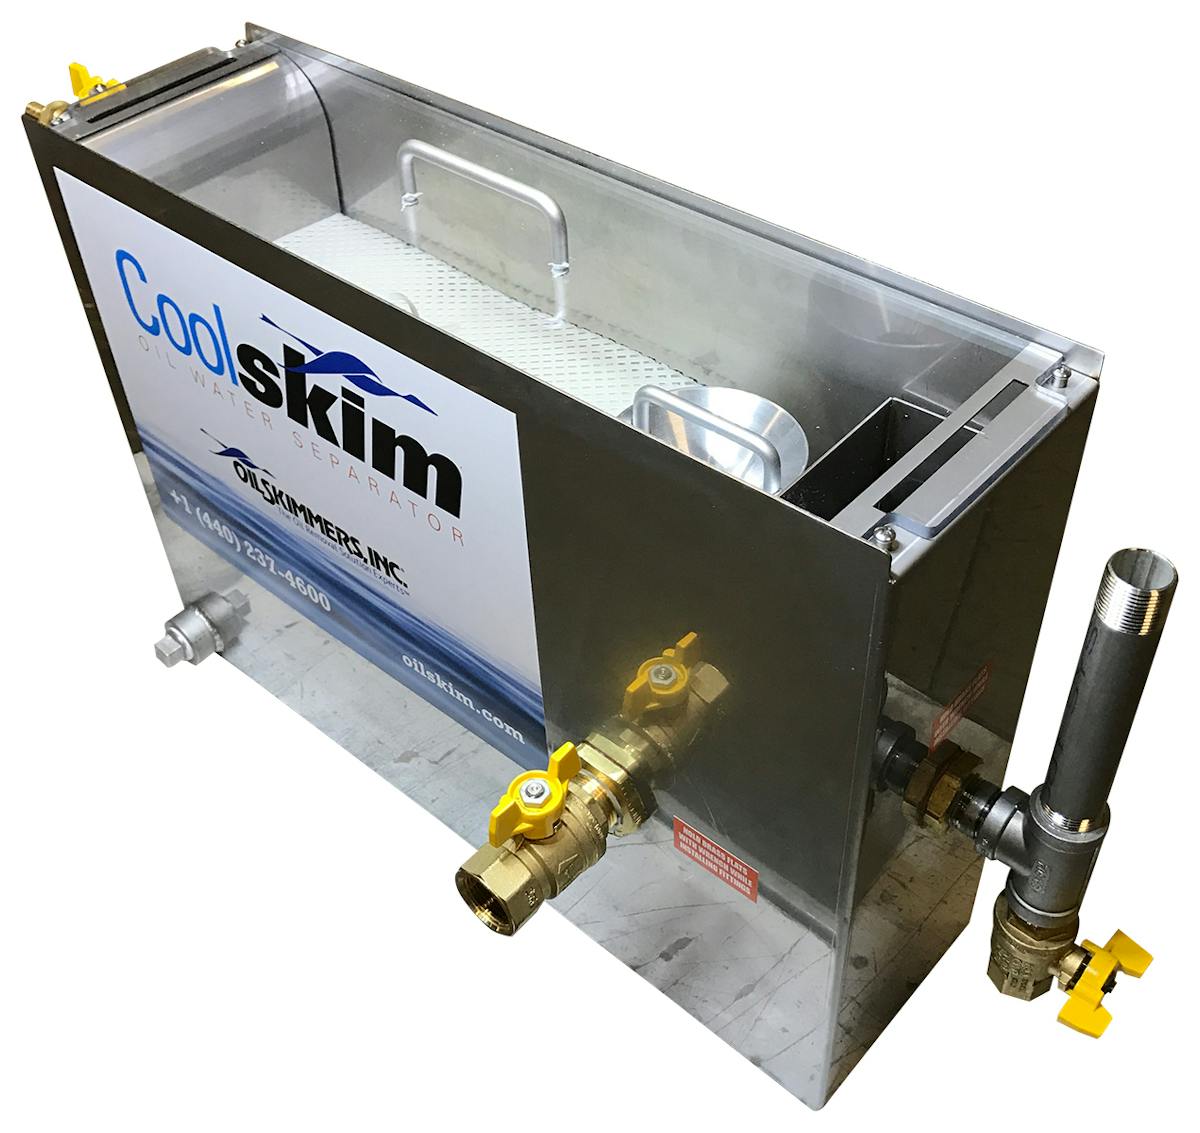 The CoolSkim uses a floating weir skimmer with a pump to bring a continual flow of liquid from the sump to the separator. The solution flows through a coalescing media pack to facilitate oil separation and oil rises to the surface, forming two distinct layers. The oil flows down an adjustable weir funnel and drains to a collection vessel. Clean coolant is returned to the coolant system.